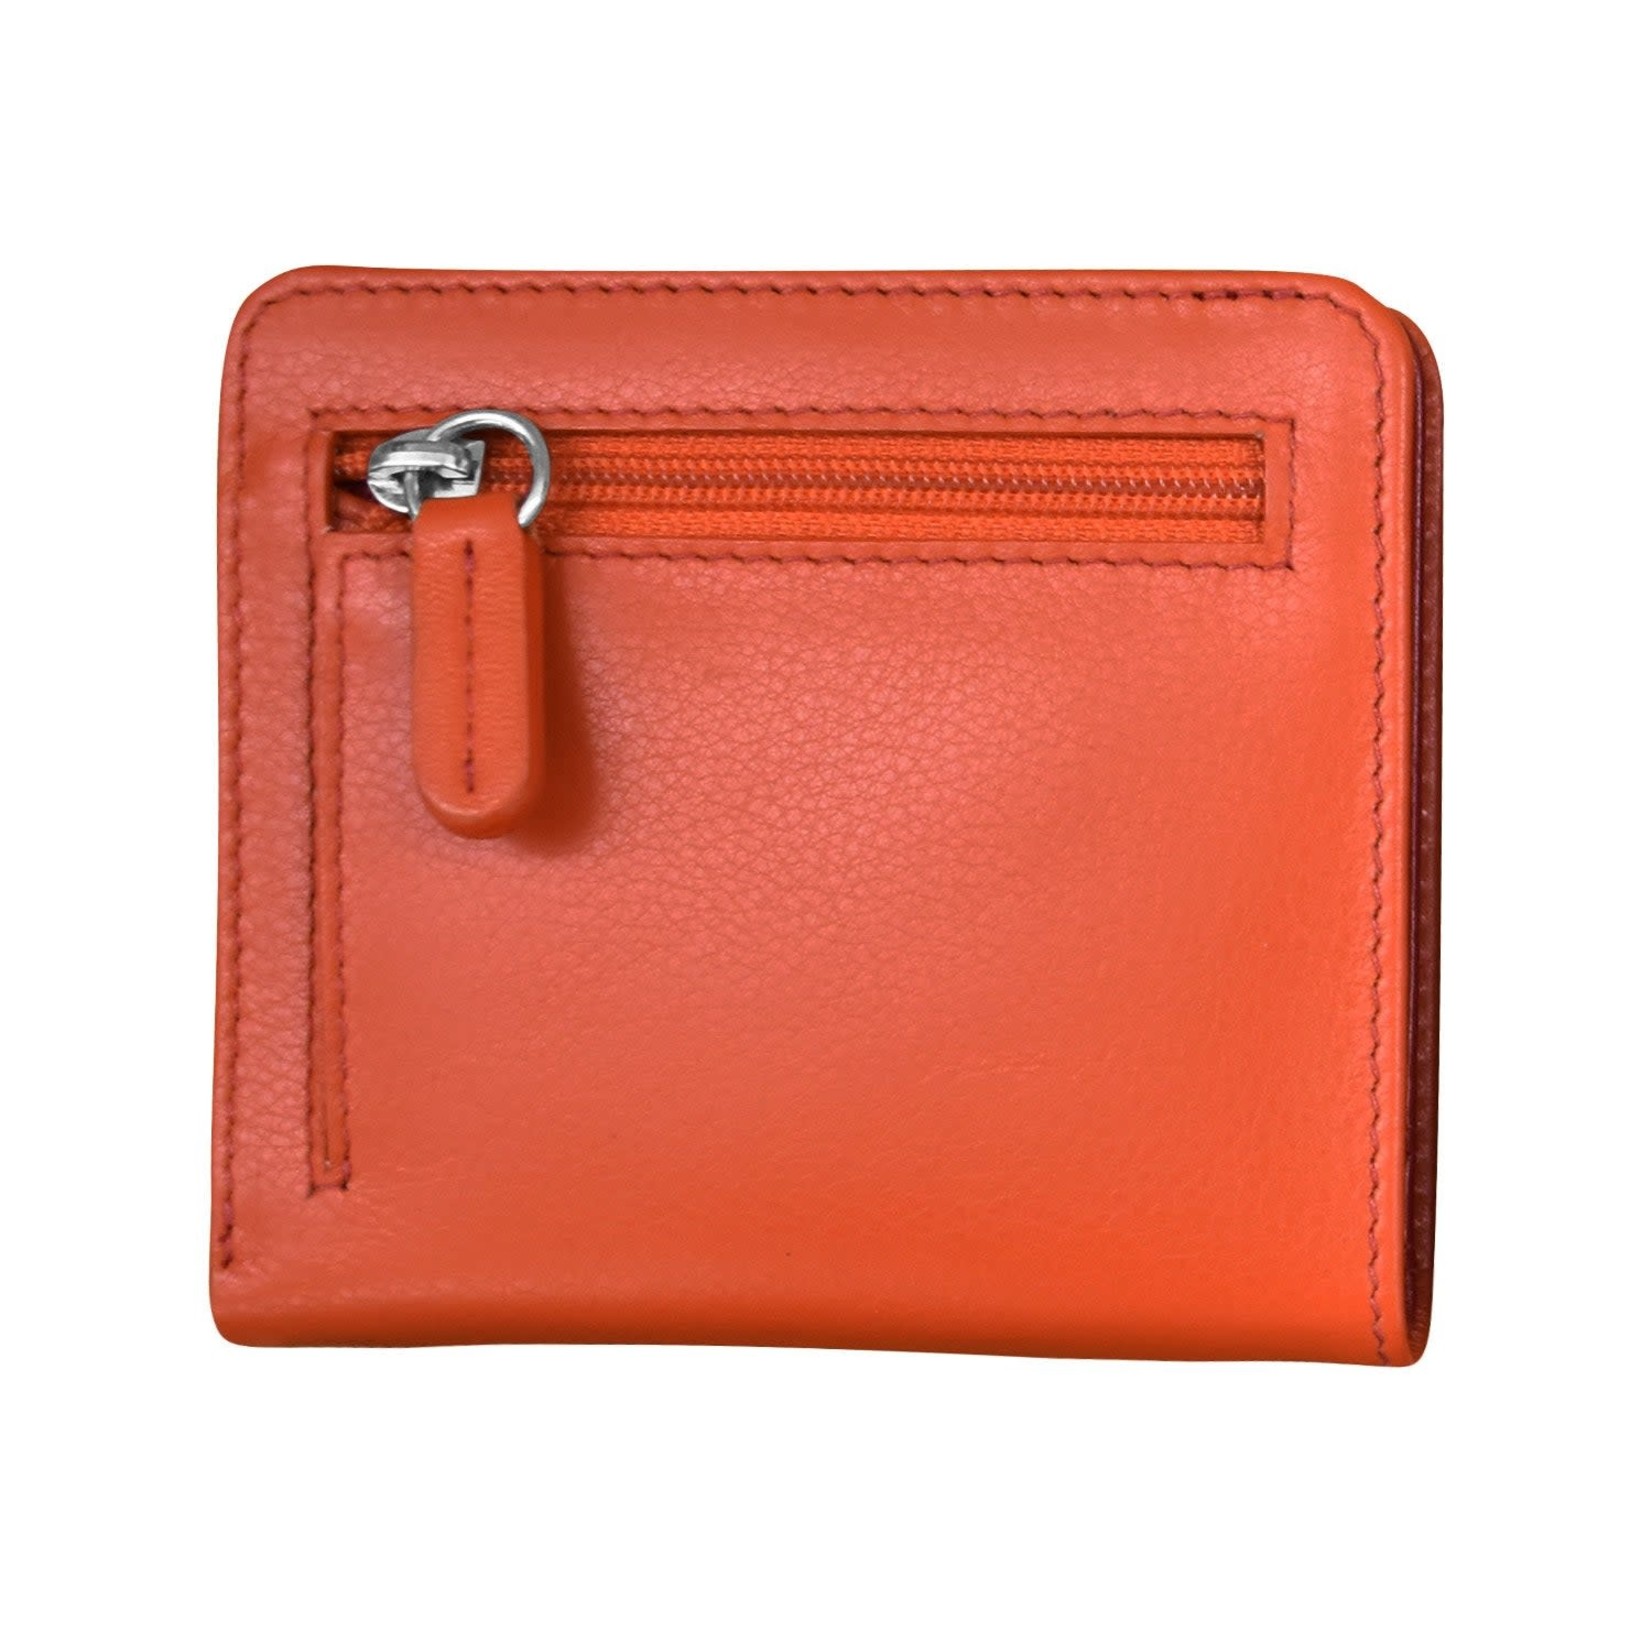 Leather Handbags and Accessories 7831 Orange/Red - RFID Mini Wallet Two Toned